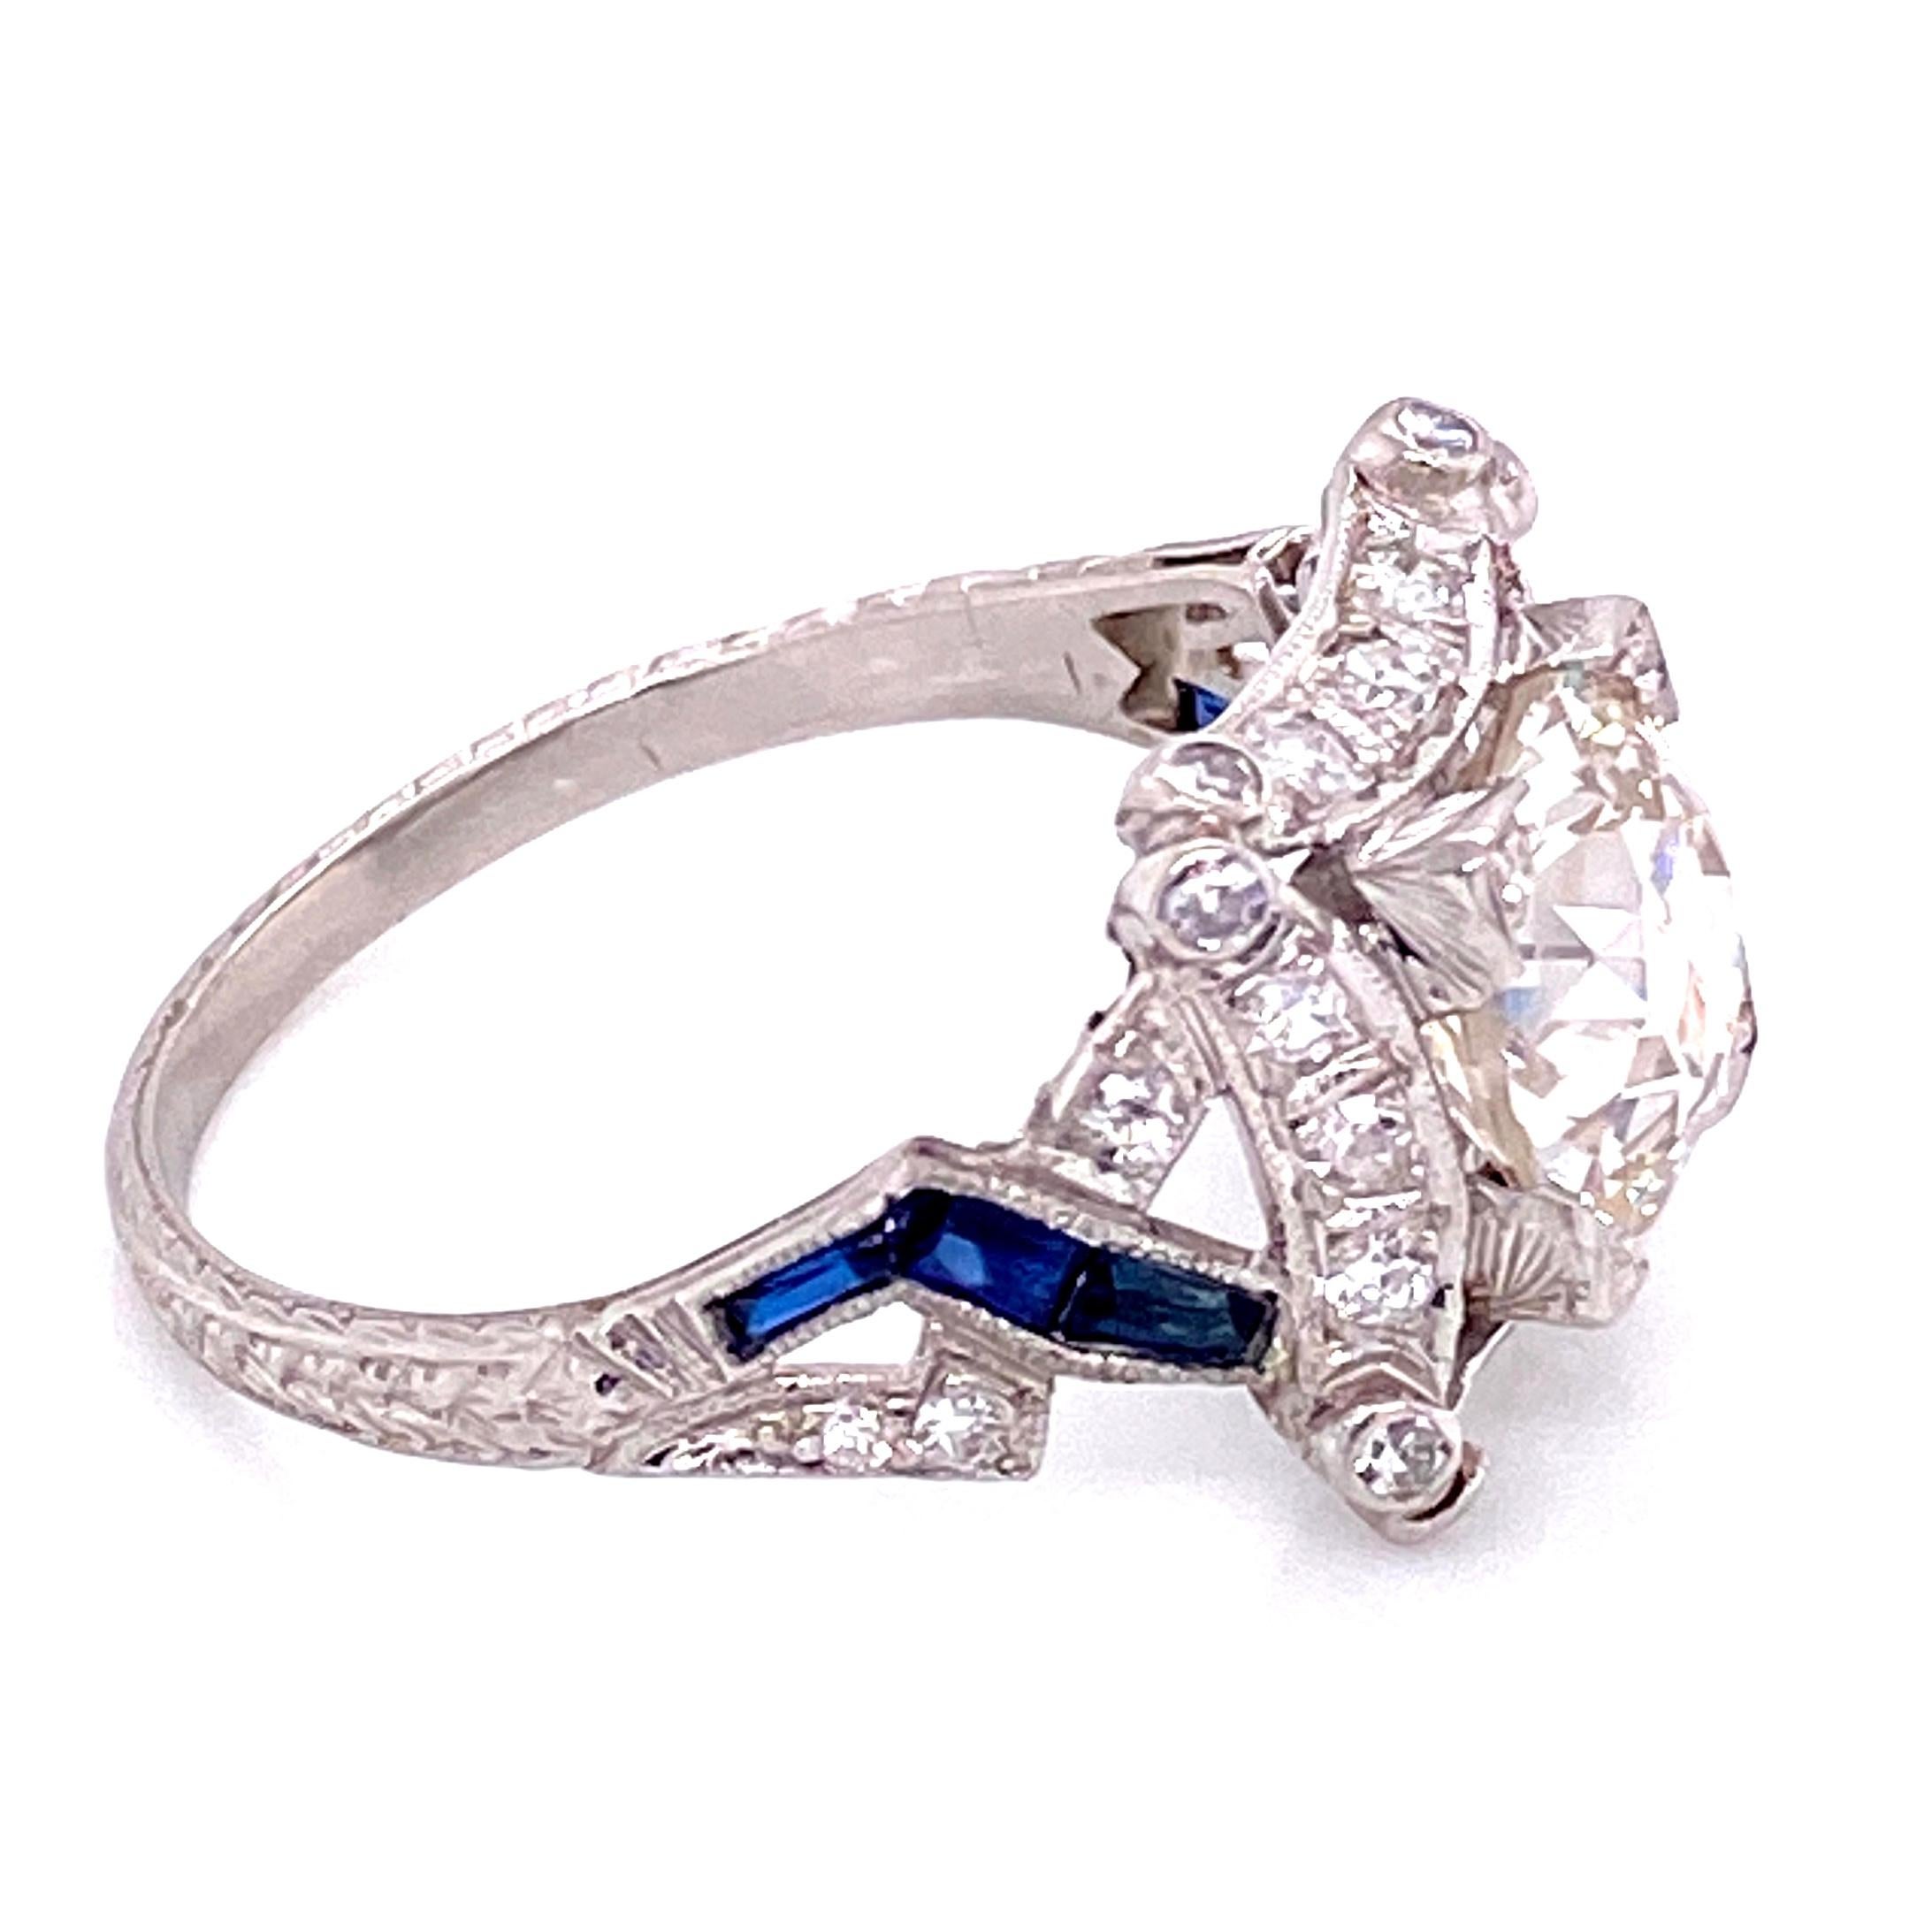 Beautiful and finely detailed Diamond and Sapphire Art Deco style Cocktail Ring, center securely set with an Old European cut Diamond weighing approx. 2.16 Carat, SI2 clarity; K color, surrounded by Diamonds weighing approx. 0.46 total carats and